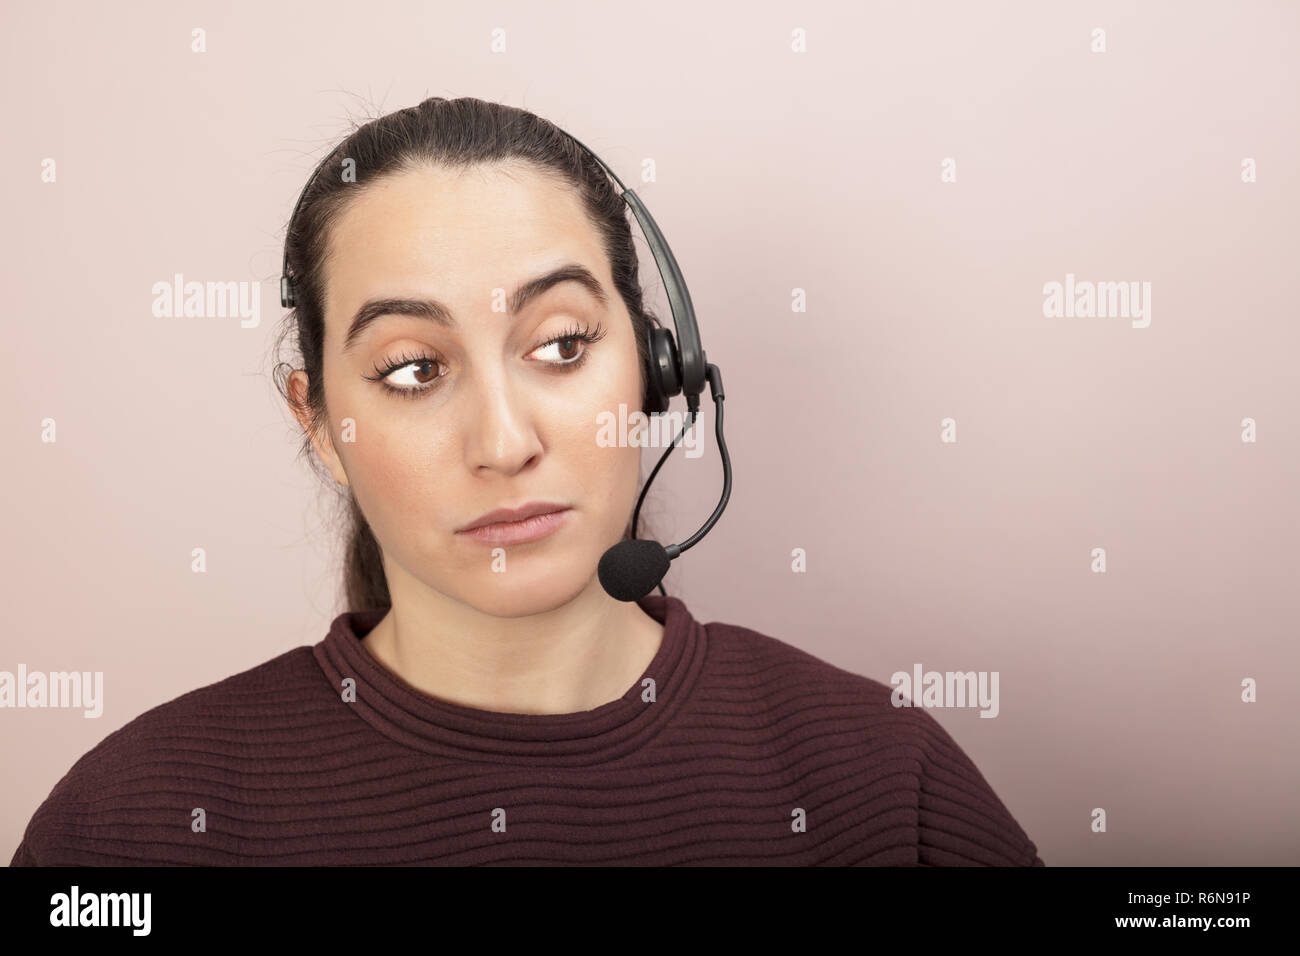 Sceptical Help Desk Operator Listening To A Call Stock Photo